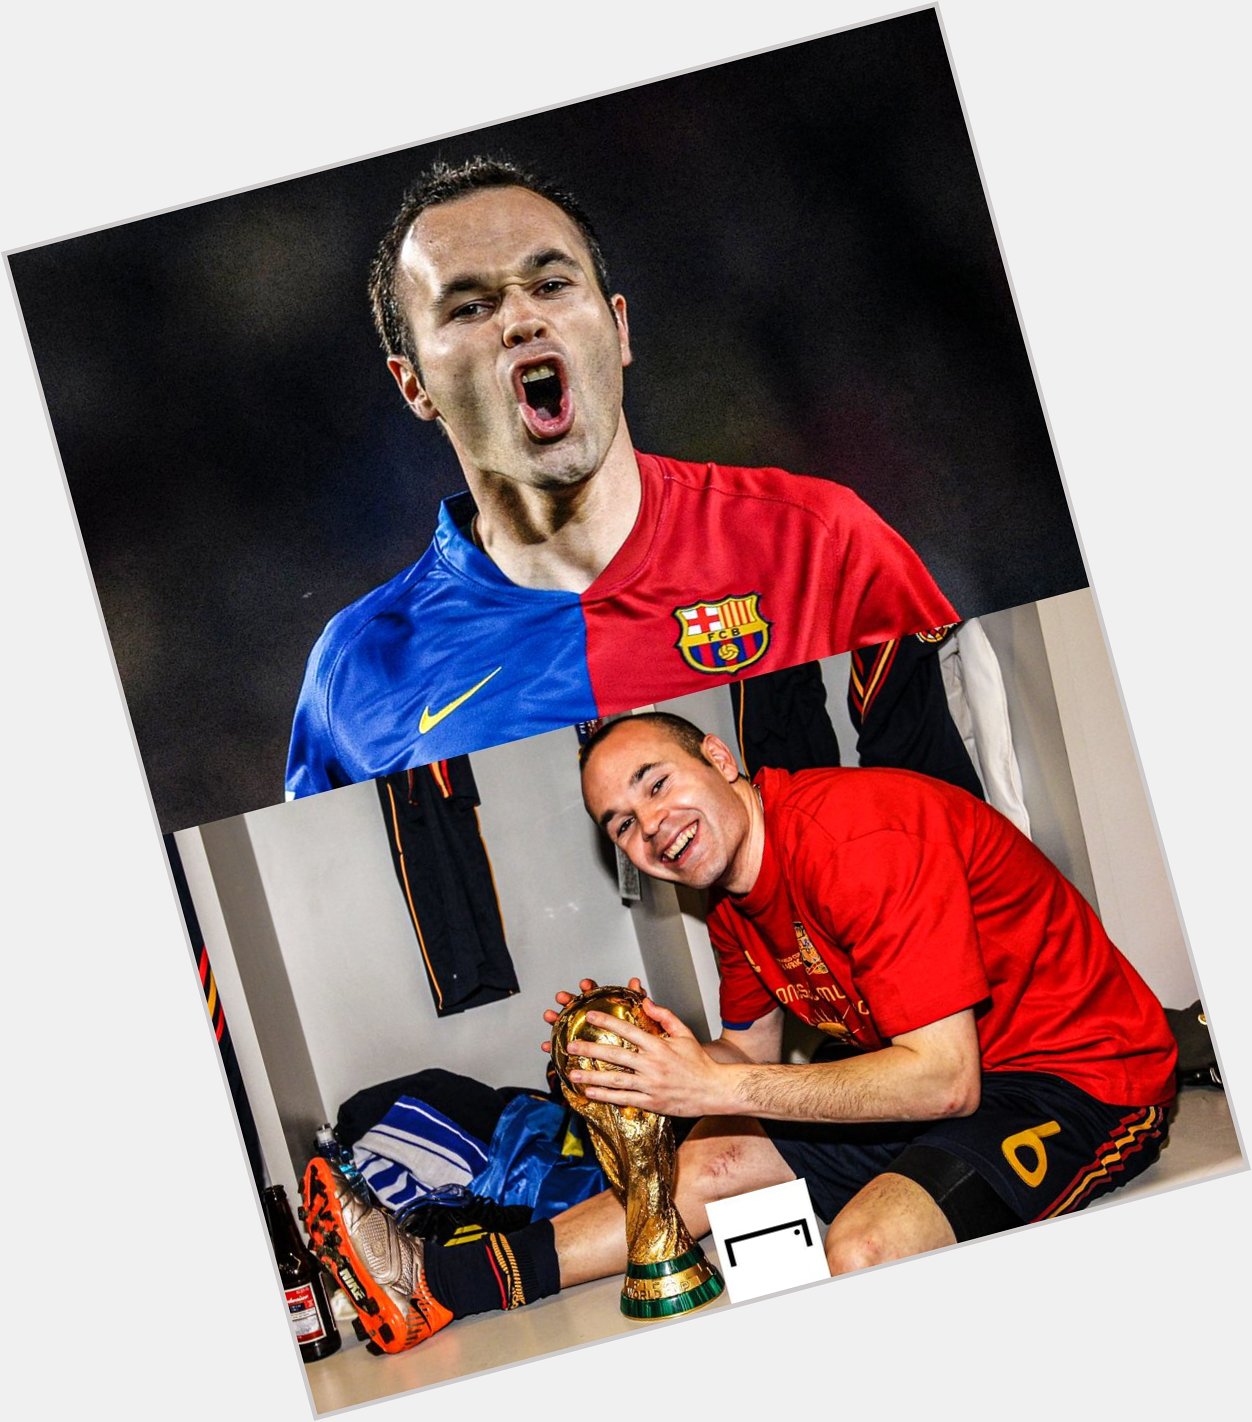 He\s one for the ages.

Happy 38th birthday, Andres Iniesta 